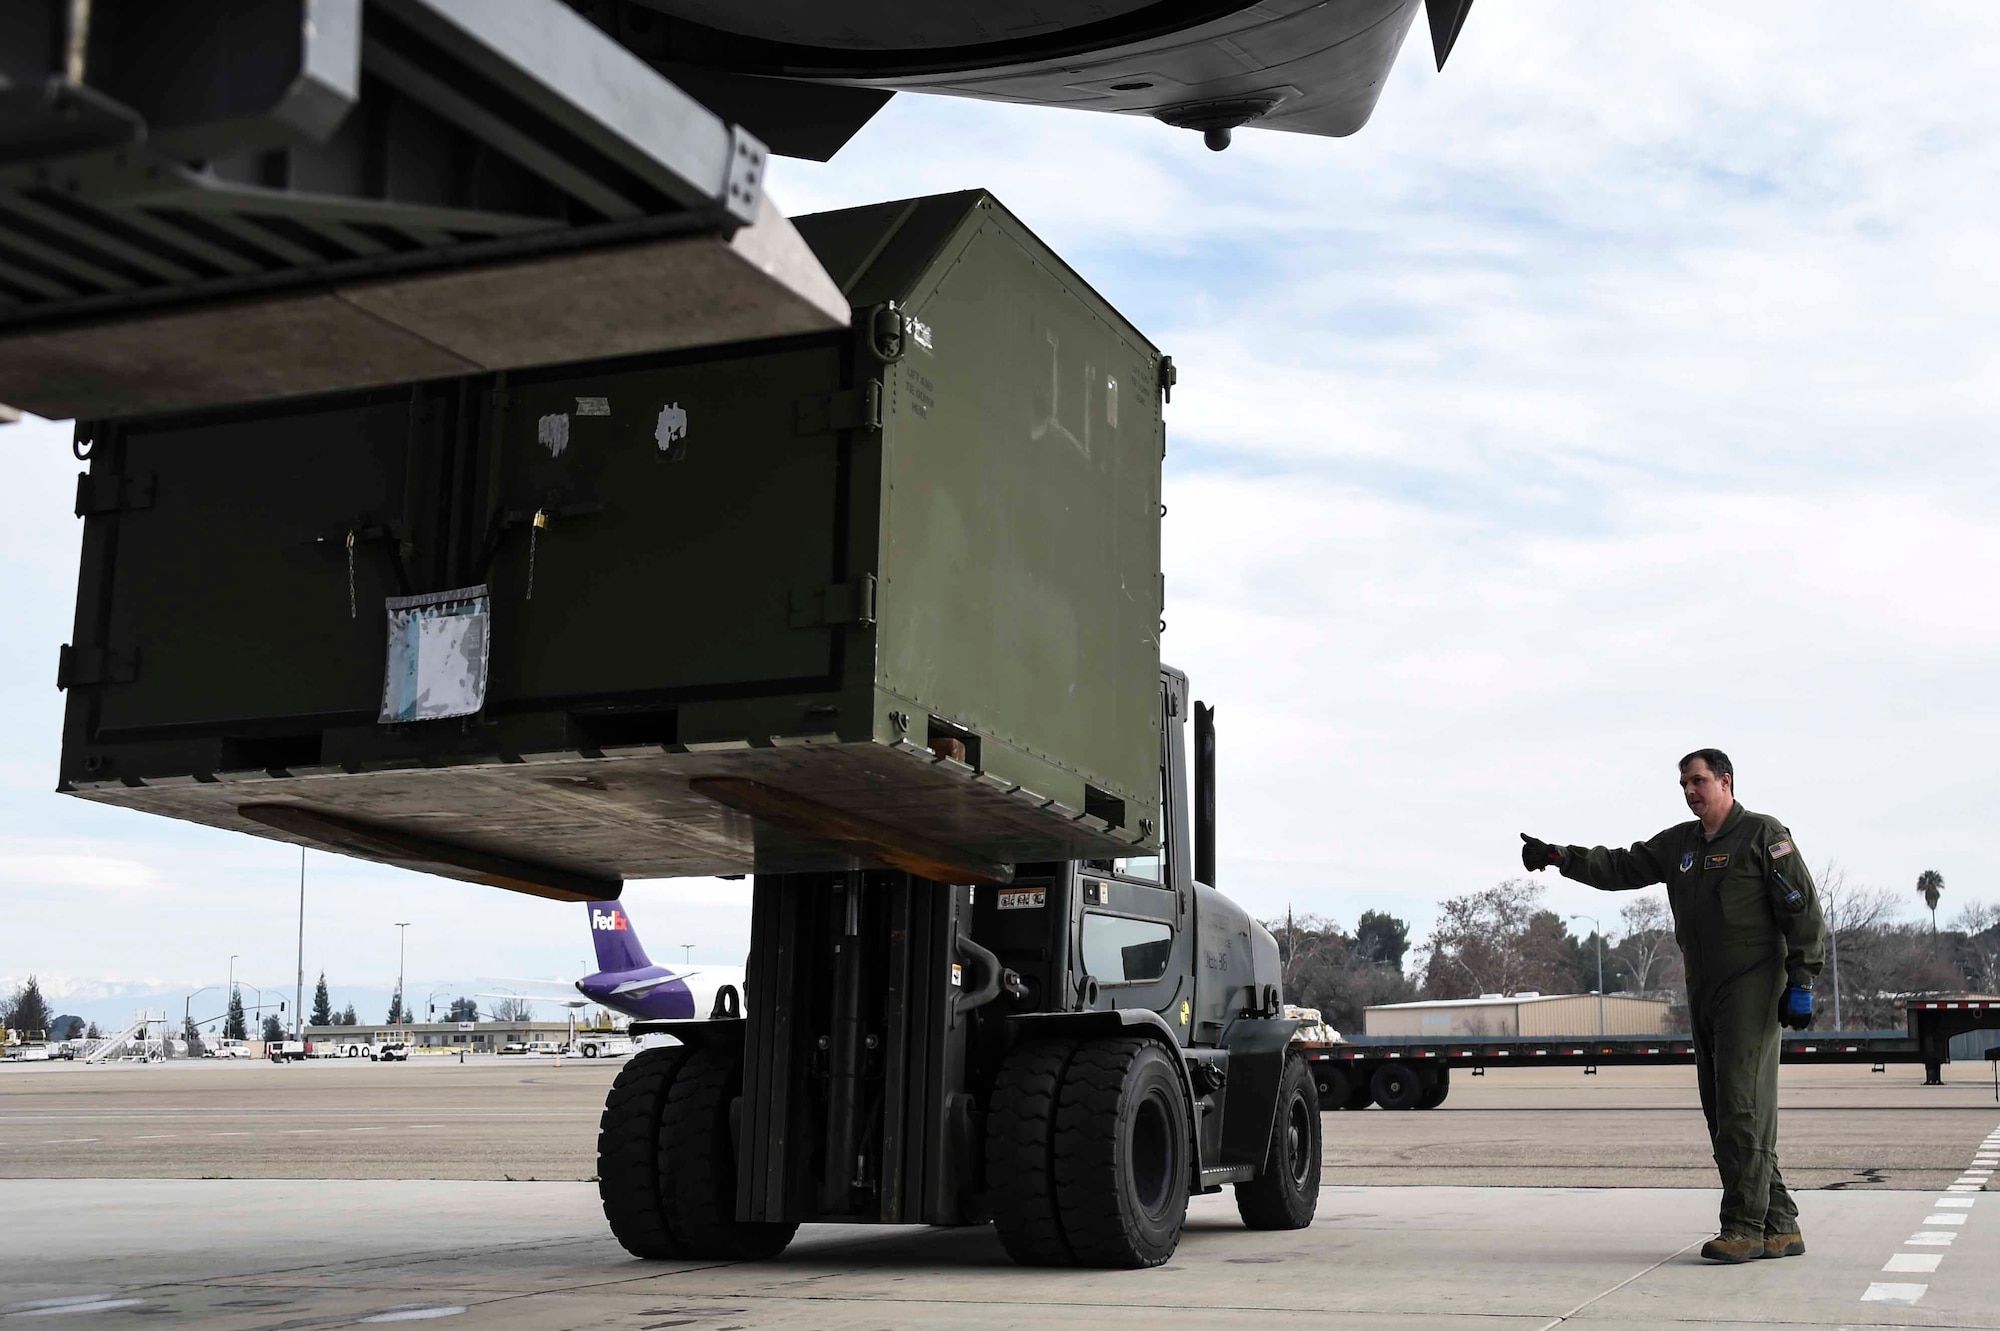 U.S. Air Force Master Sgt. Daryl Martini, a New York Air National Guard 105th Airlift Wing load master, helps load a pallet aboard a C-17 Globemaster III at the Fresno Air National Guard Base, Jan. 21, 2016, in support of the 144th Fighter Wing’s participation in Red Flag 16-01. Red Flag is a realistic combat training exercise, which is hosted by Nellis Air Force Base, Nevada and the U.S. Air Force Warfare Center. The 105th AW airlifted 12 pallets and 29 personnel assigned to the 144th FW. (U.S. Air National Guard Senior Airman Klynne Pearl Serrano)